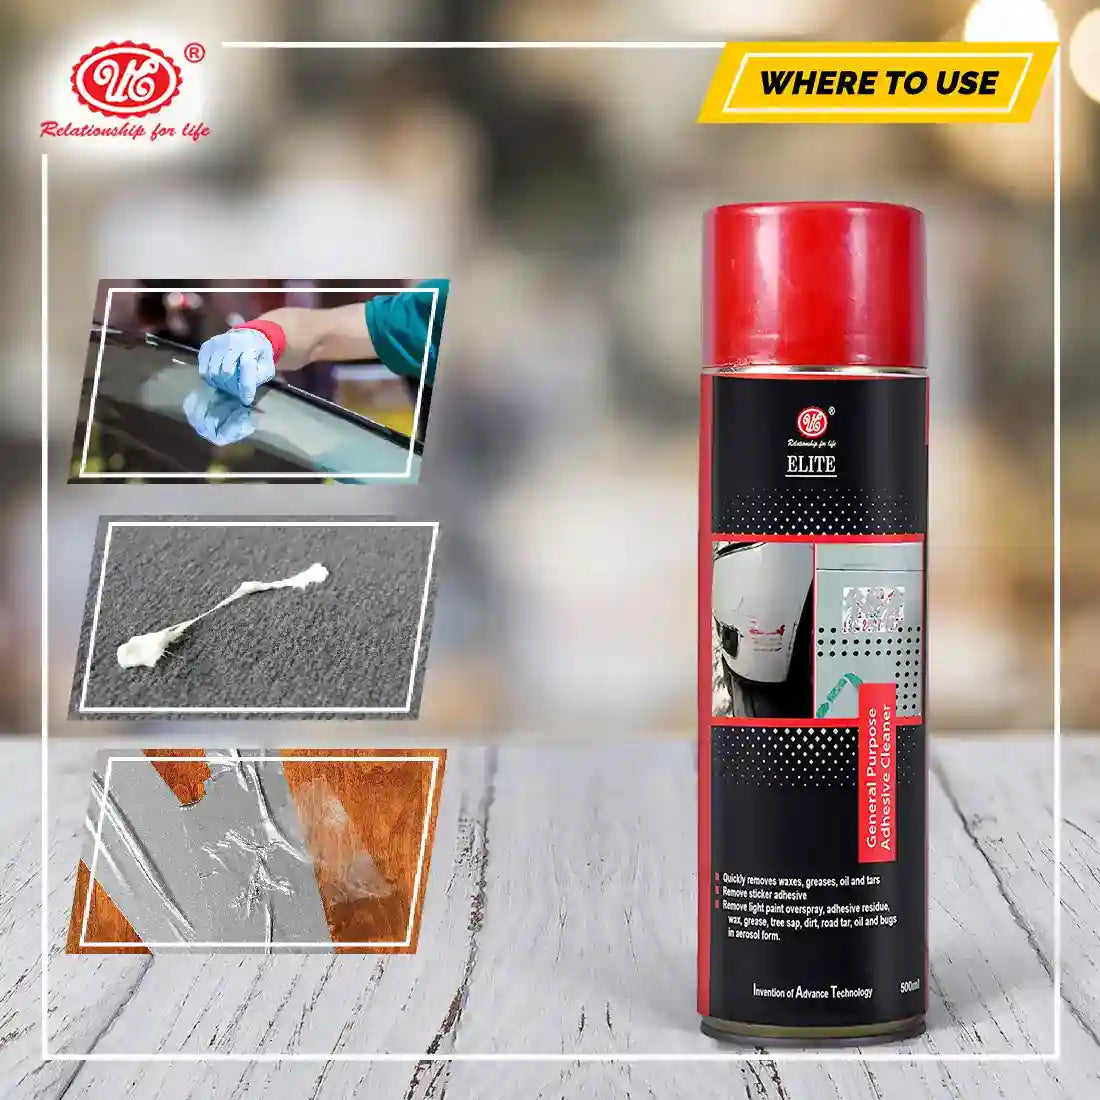 Shop Glue Adhesive Remover For Cars online